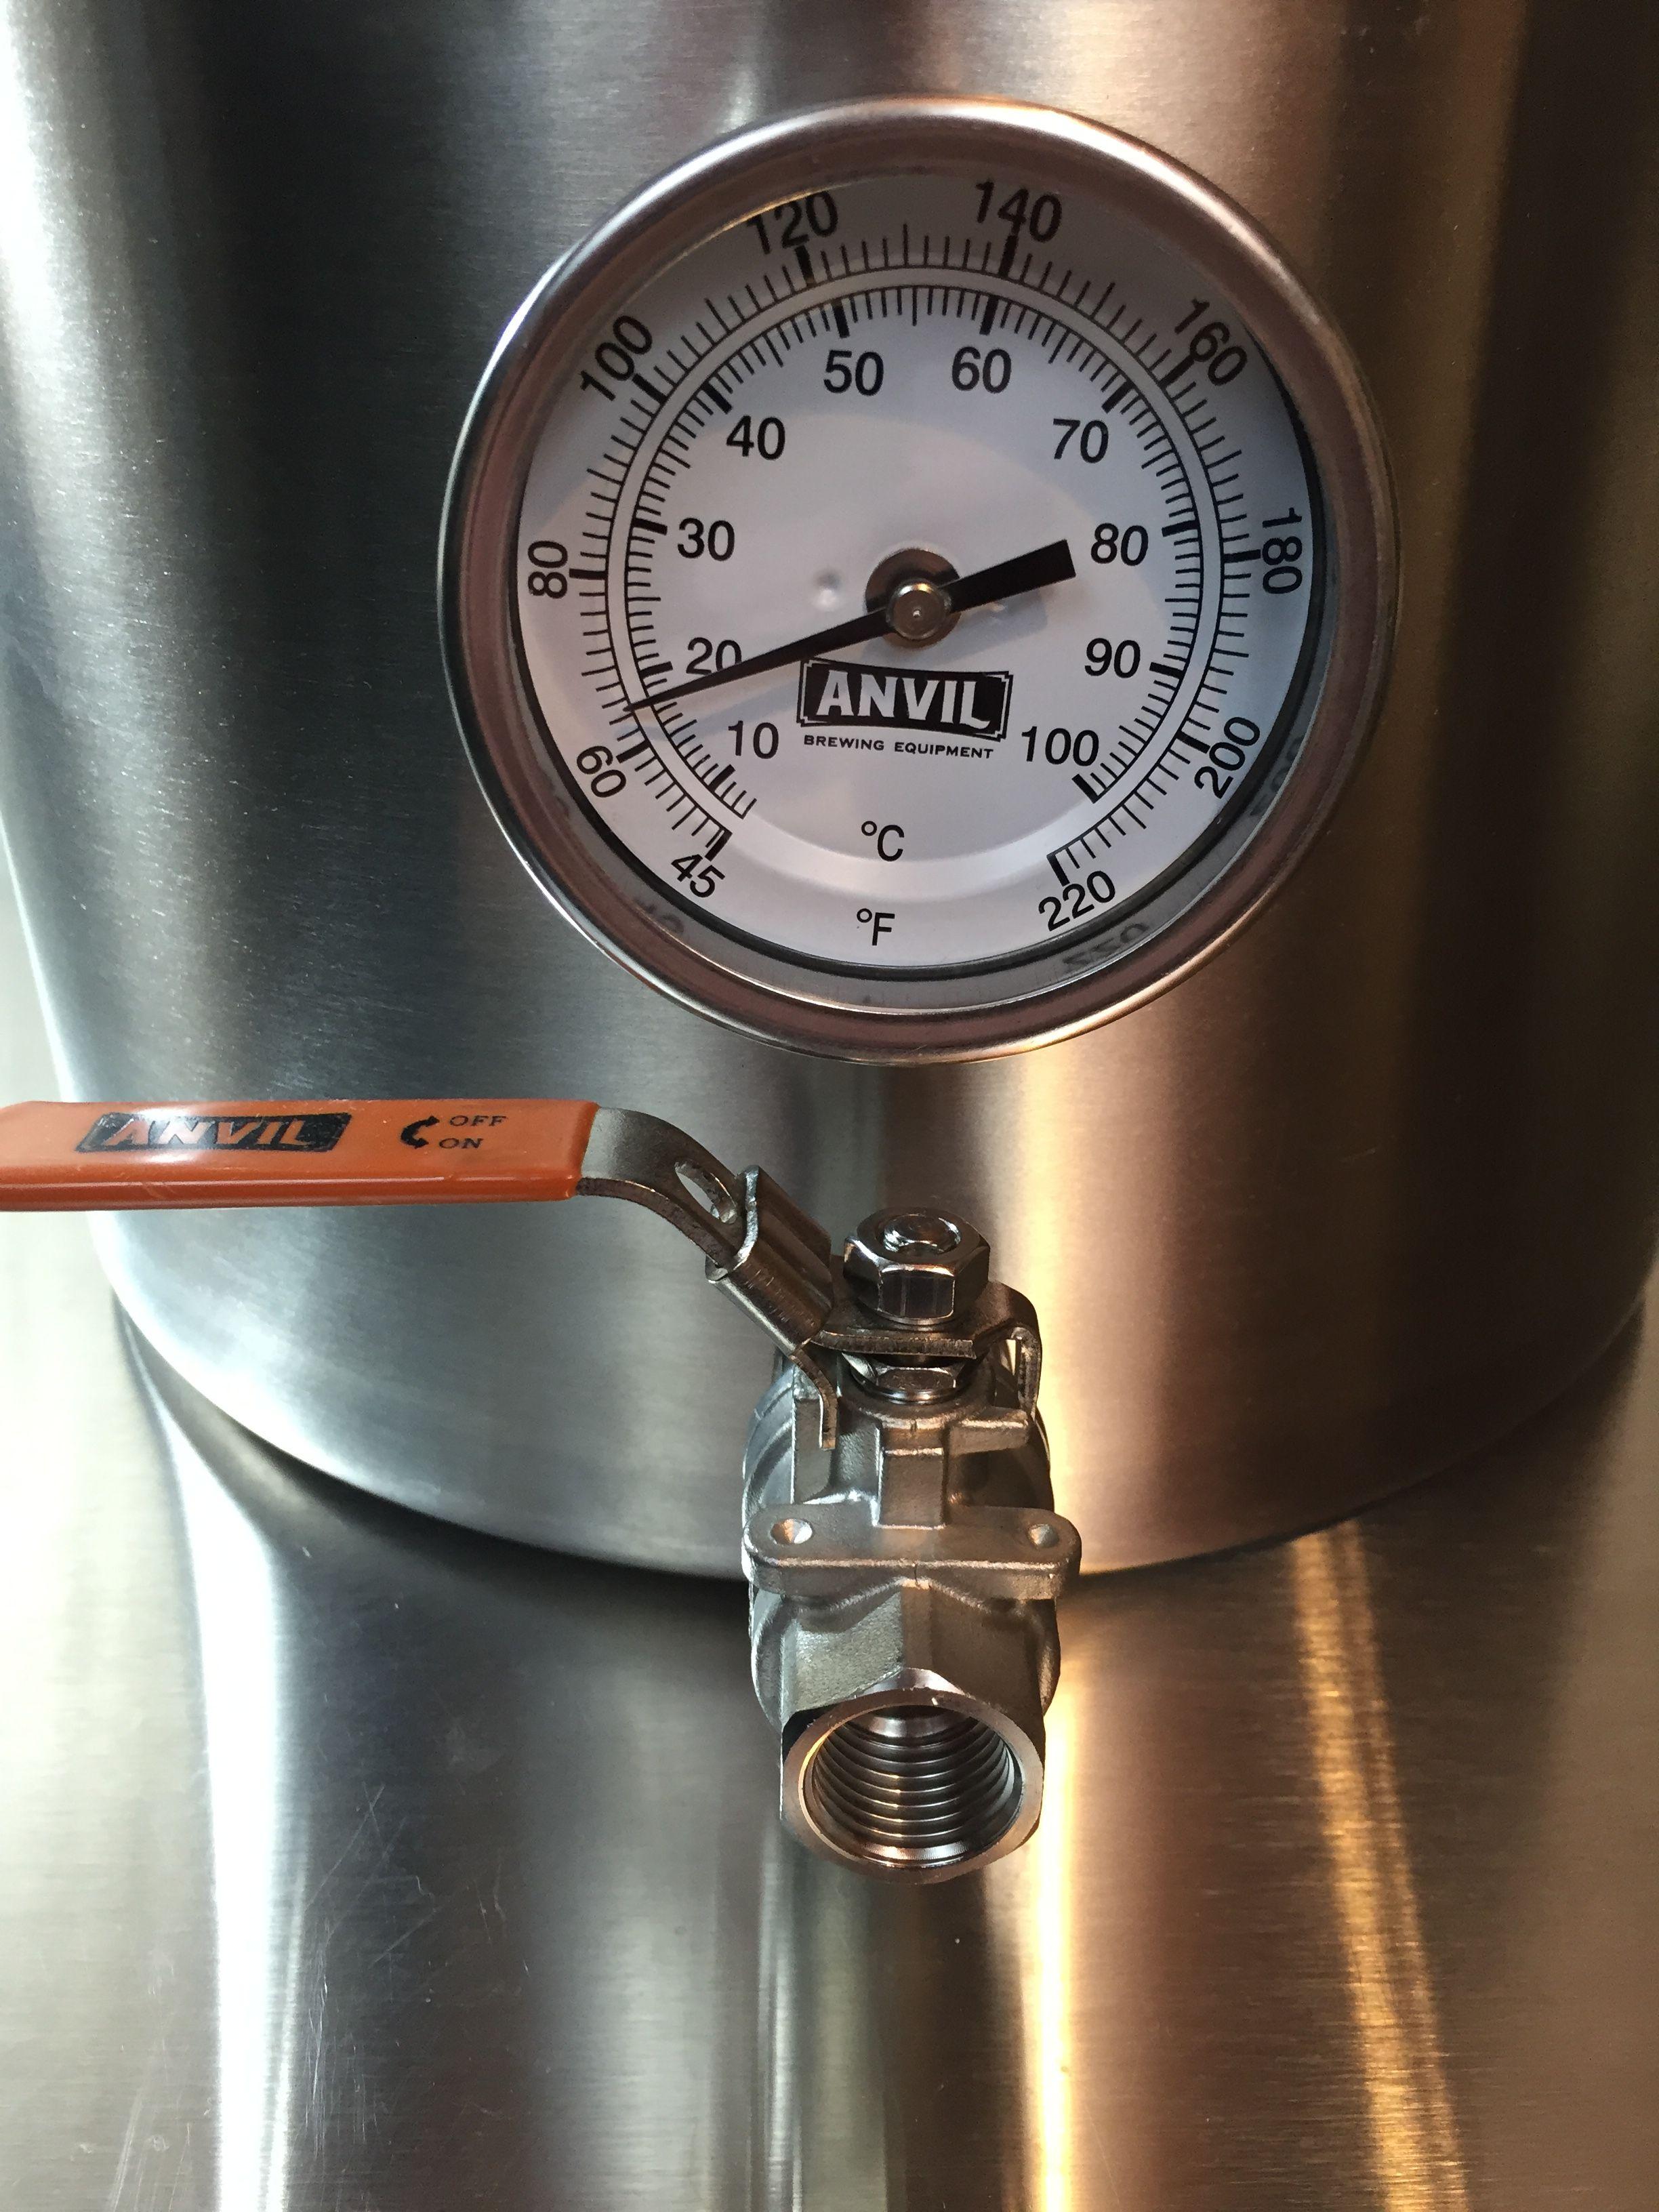 Anvil Brewing Equipment Brew Kettle Weldless Thermometer with 2.5 Long Stem